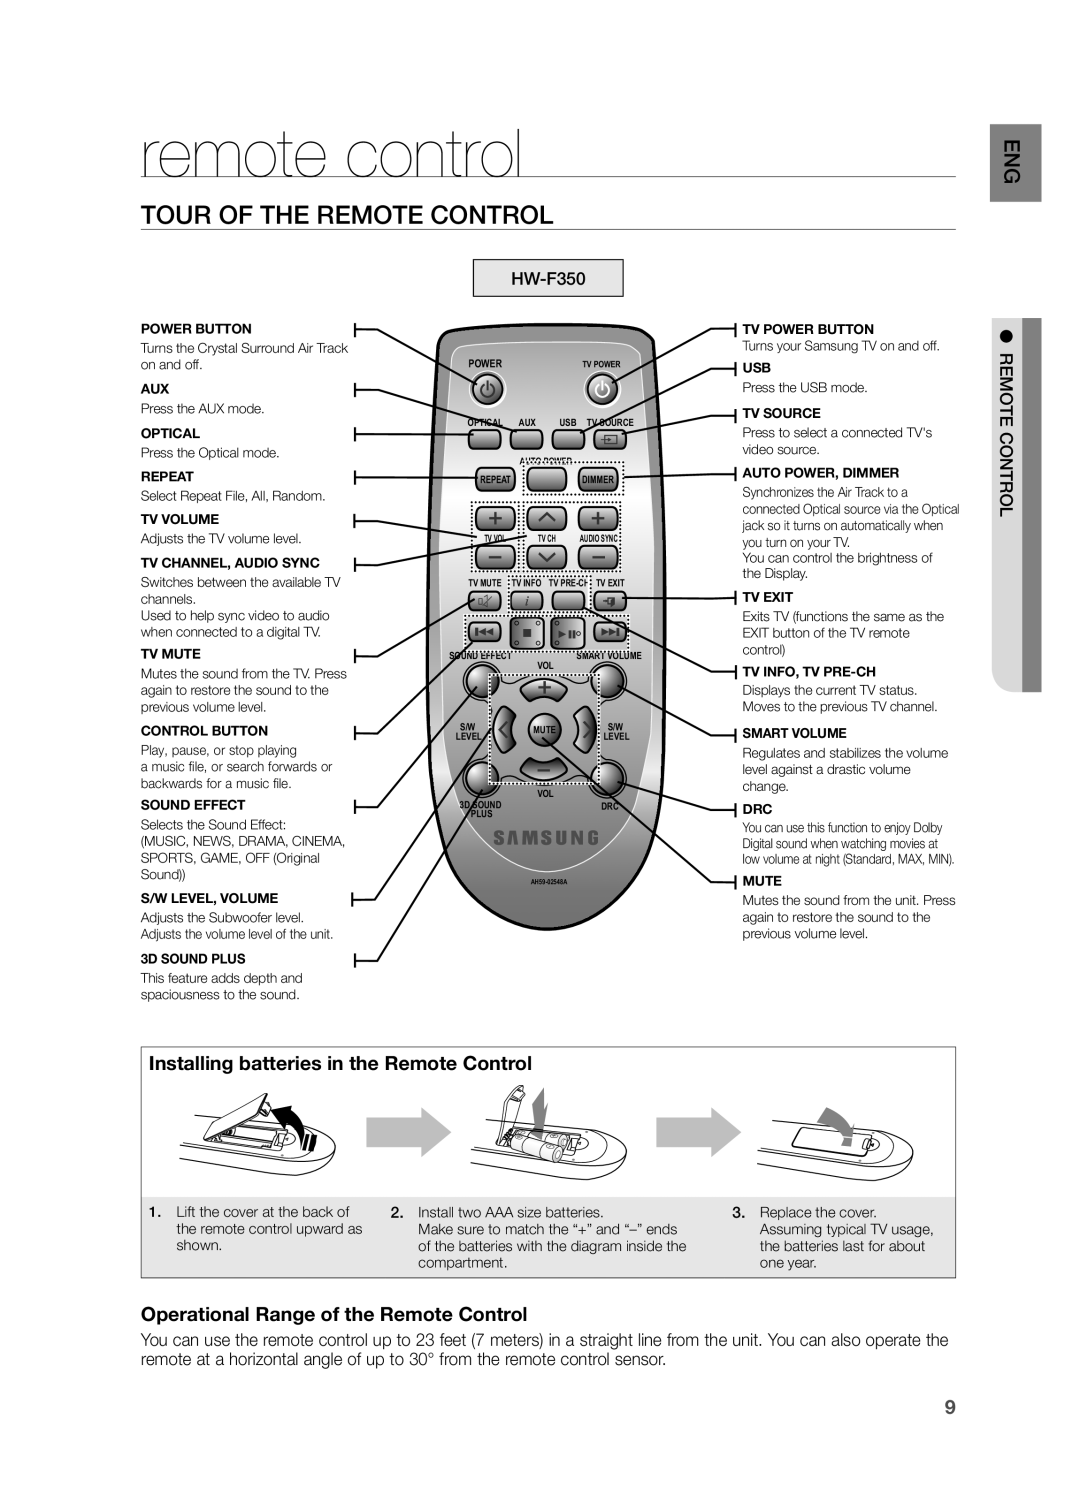 Samsung HWF355ZA, HW-F355 user manual remote control, Tour of the Remote Control, Installing batteries in the Remote Control 